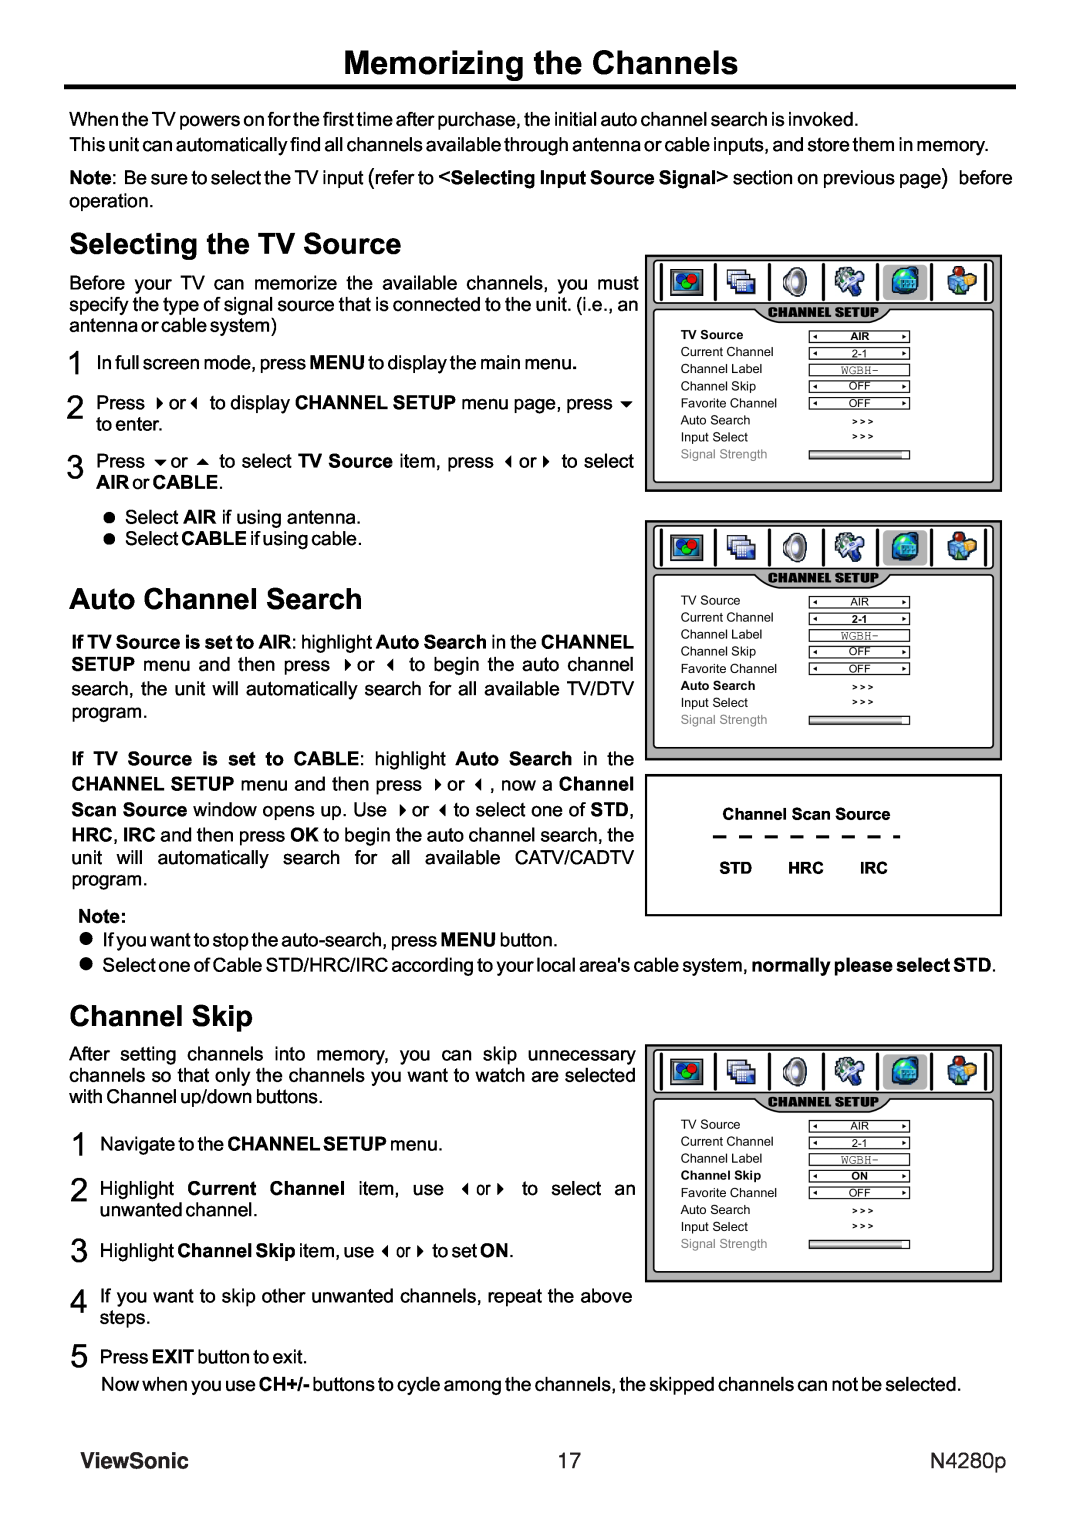 ViewSonic N4280p manual Memorizing the Channels, Selecting the TV Source, Auto Channel Search, Channel Skip, ViewSonic 